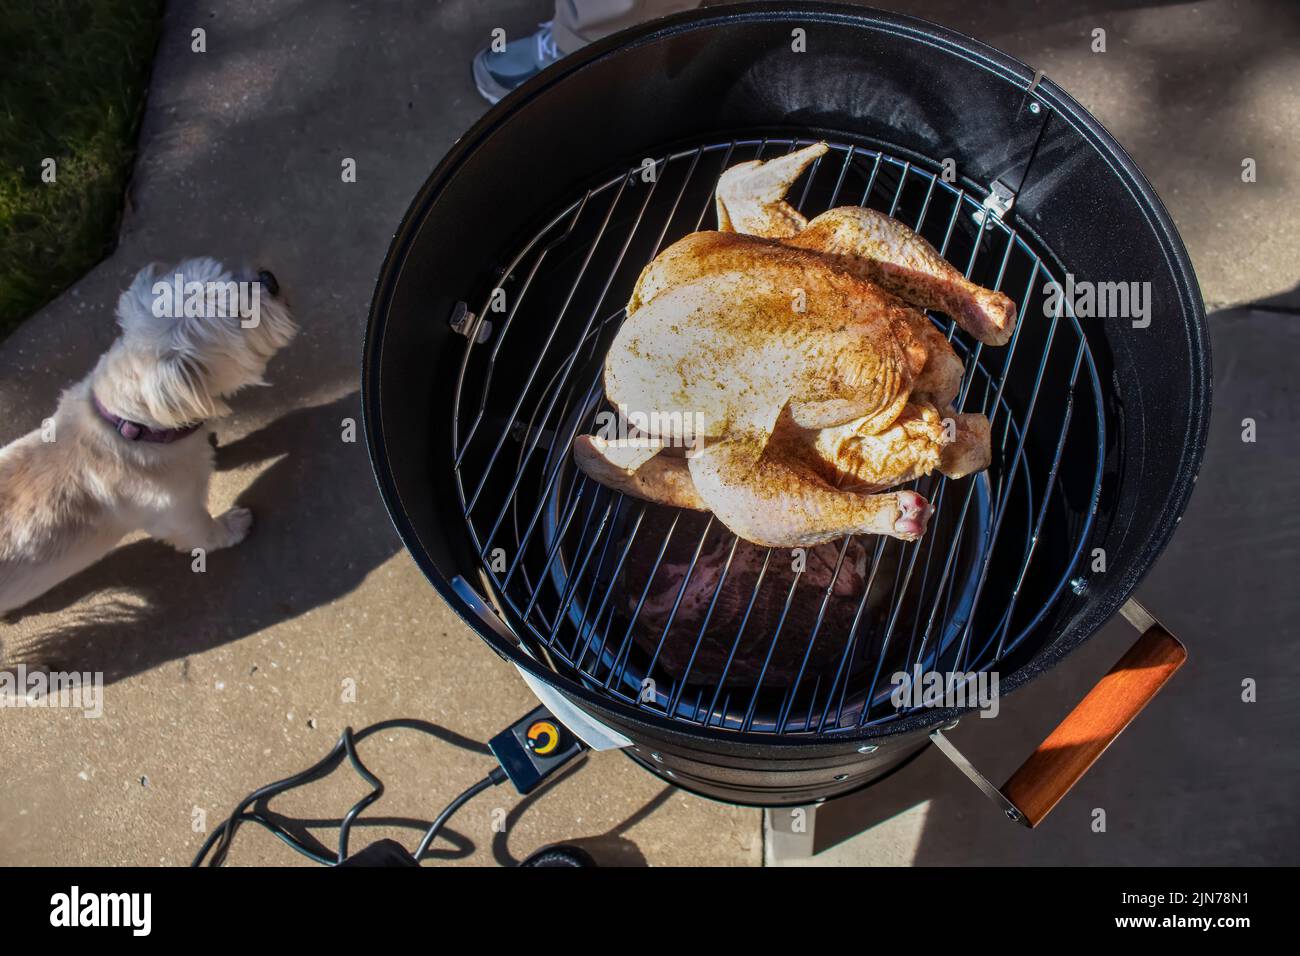 Smoking meat outside - a whole raw chicken with spices sits on the top rack of an open barrel electric smoker with a slab of meat underneath while a l Stock Photo